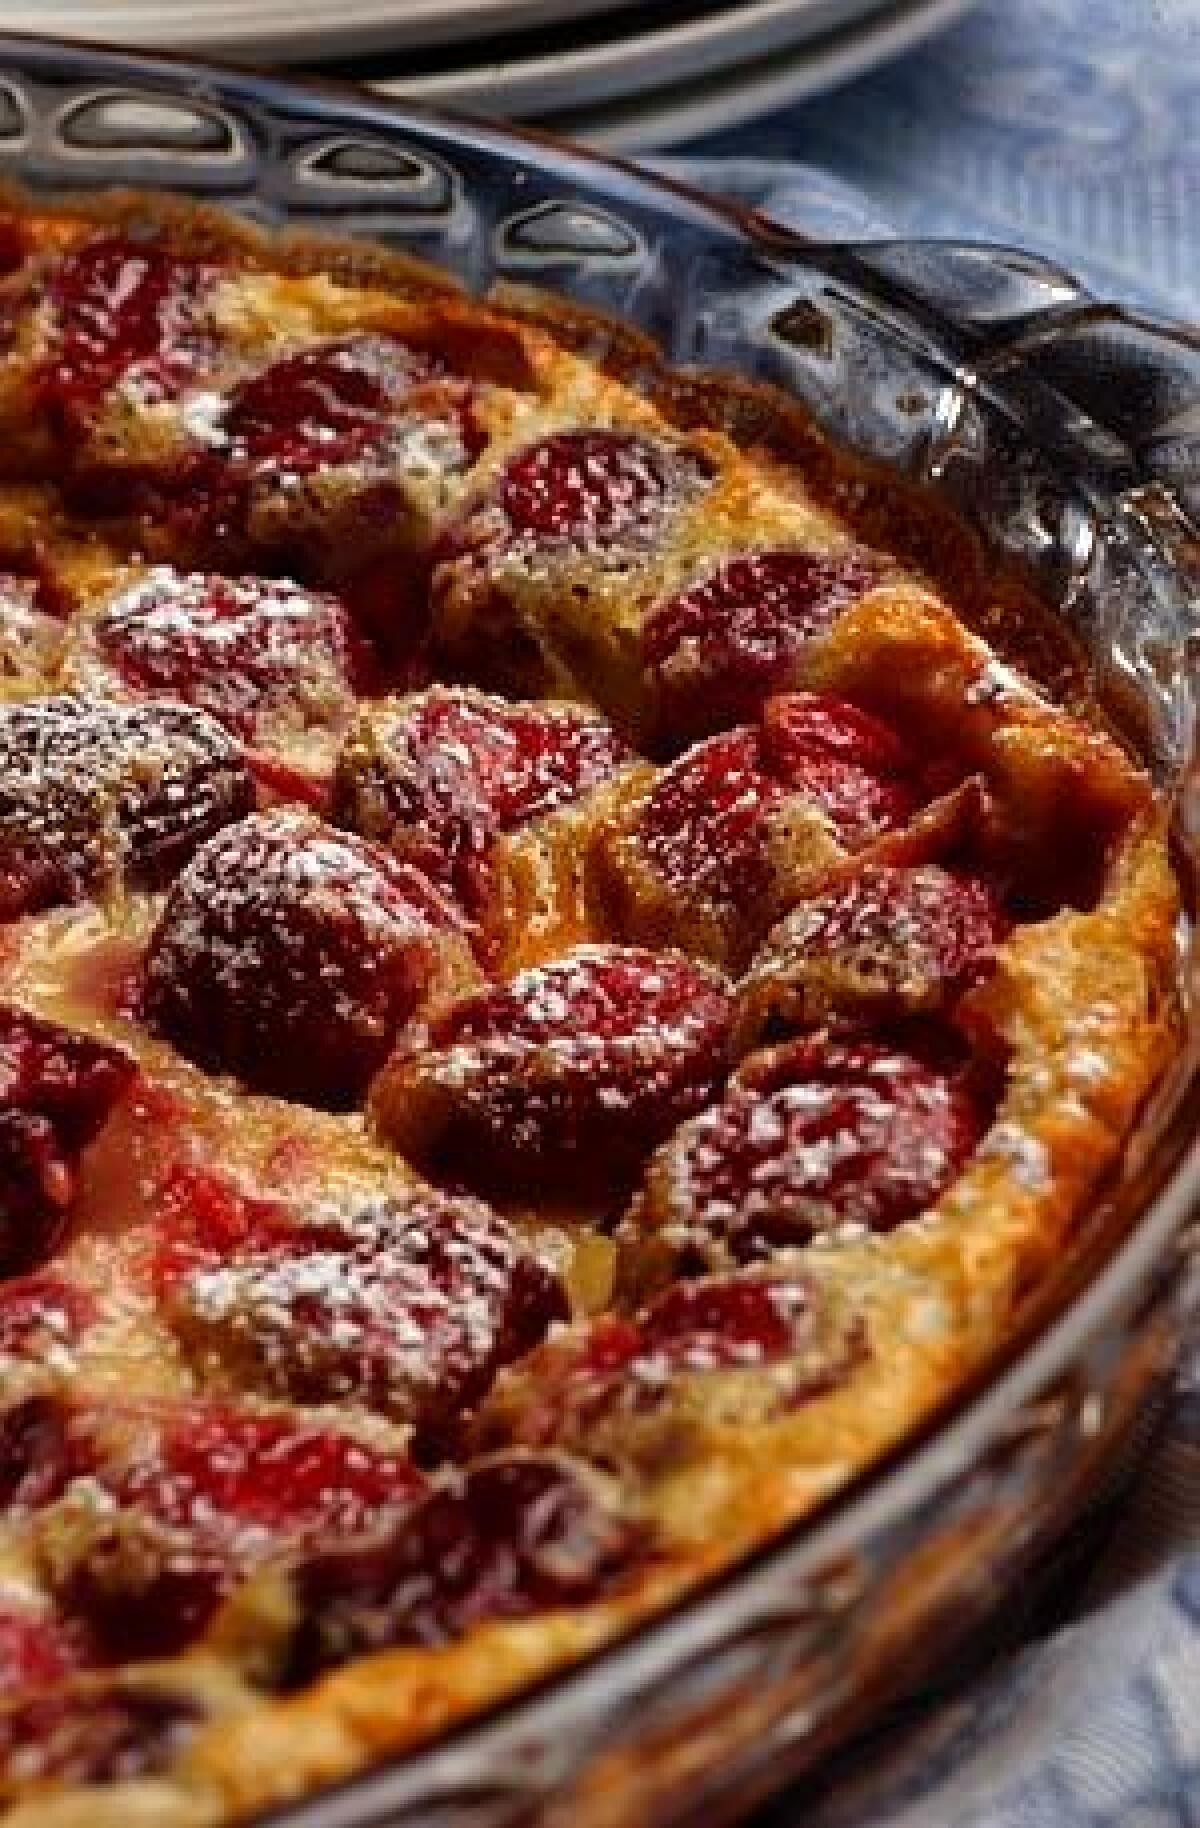 Easier to make and less fussy than a pie or tart, the clafouti is made by pouring batter over fresh fruit and baking.